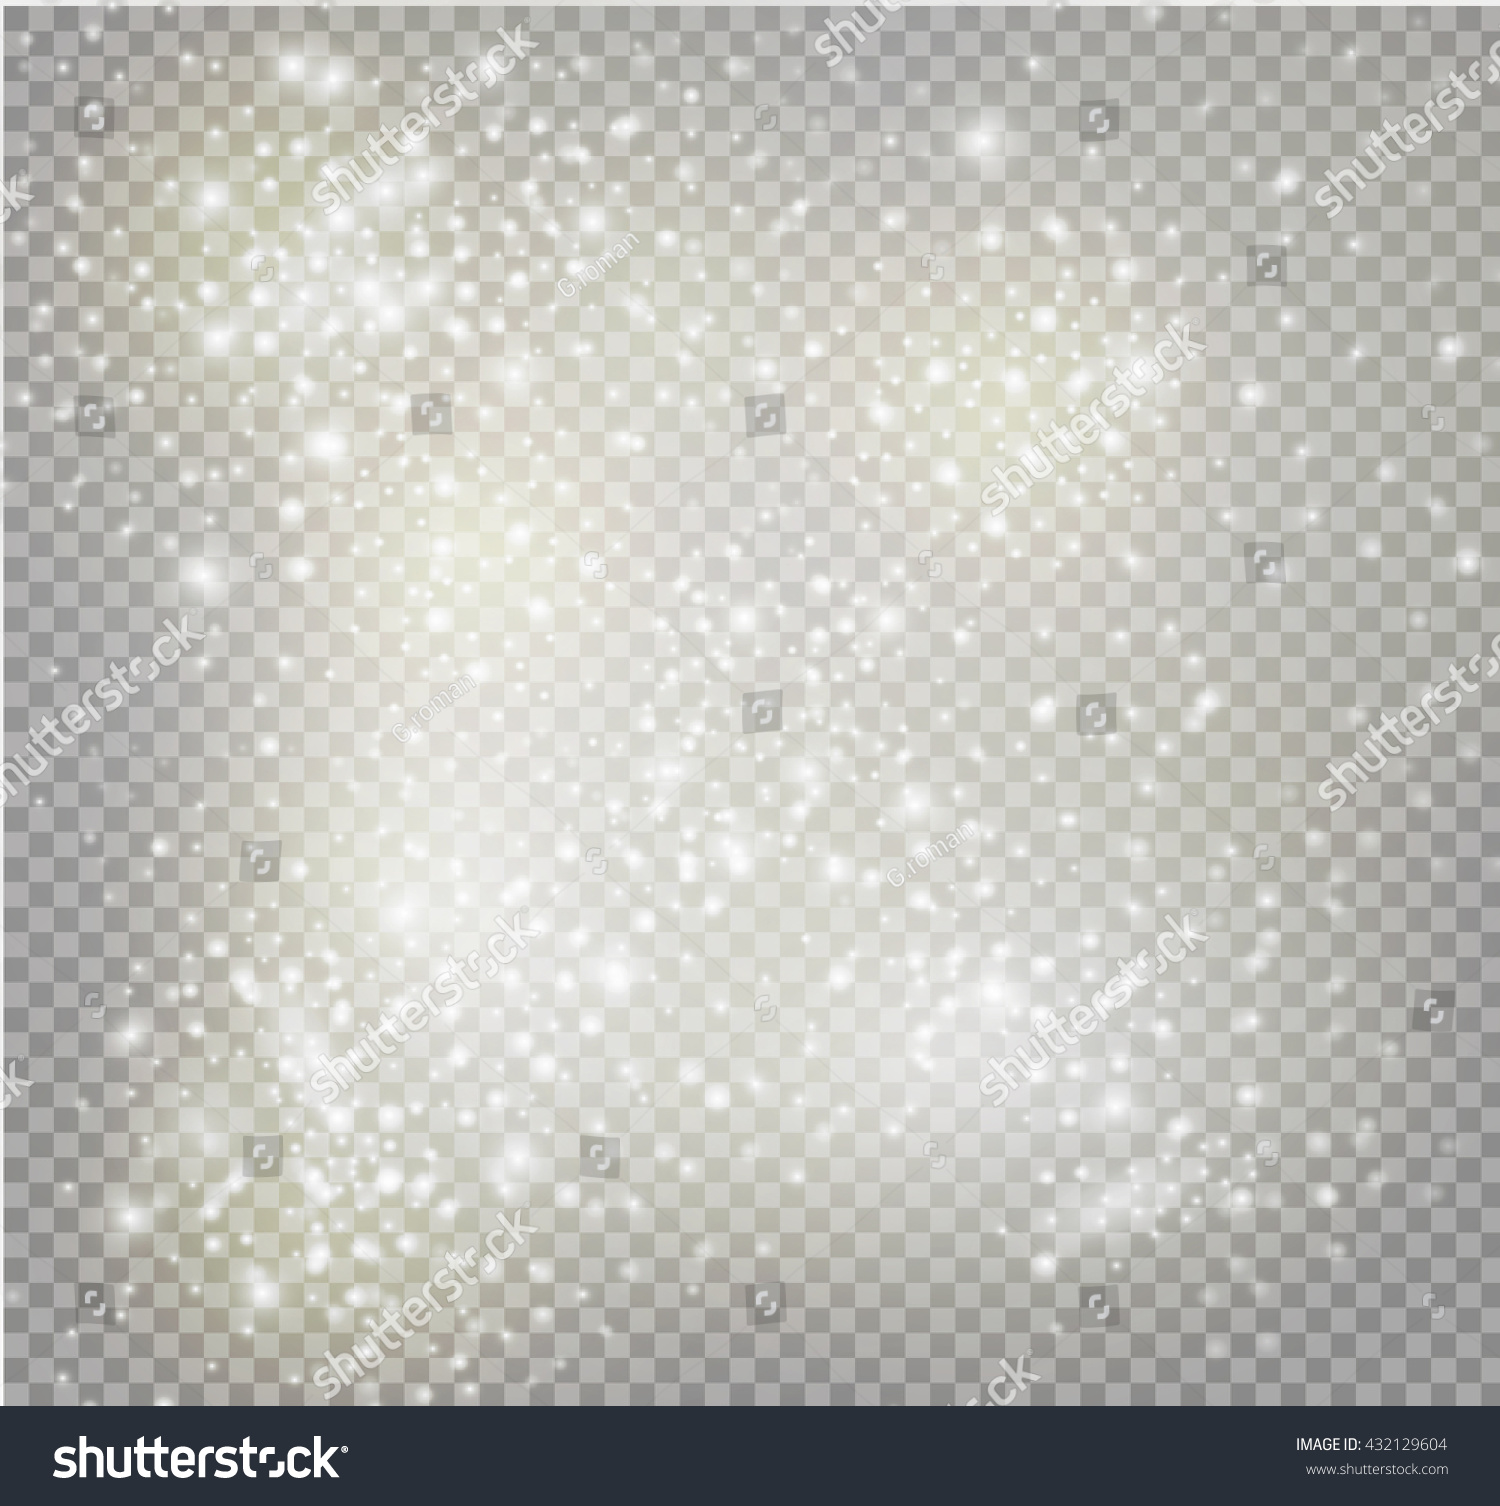 Vector Dust On A Transparent Background - 432129604 : Shutterstock